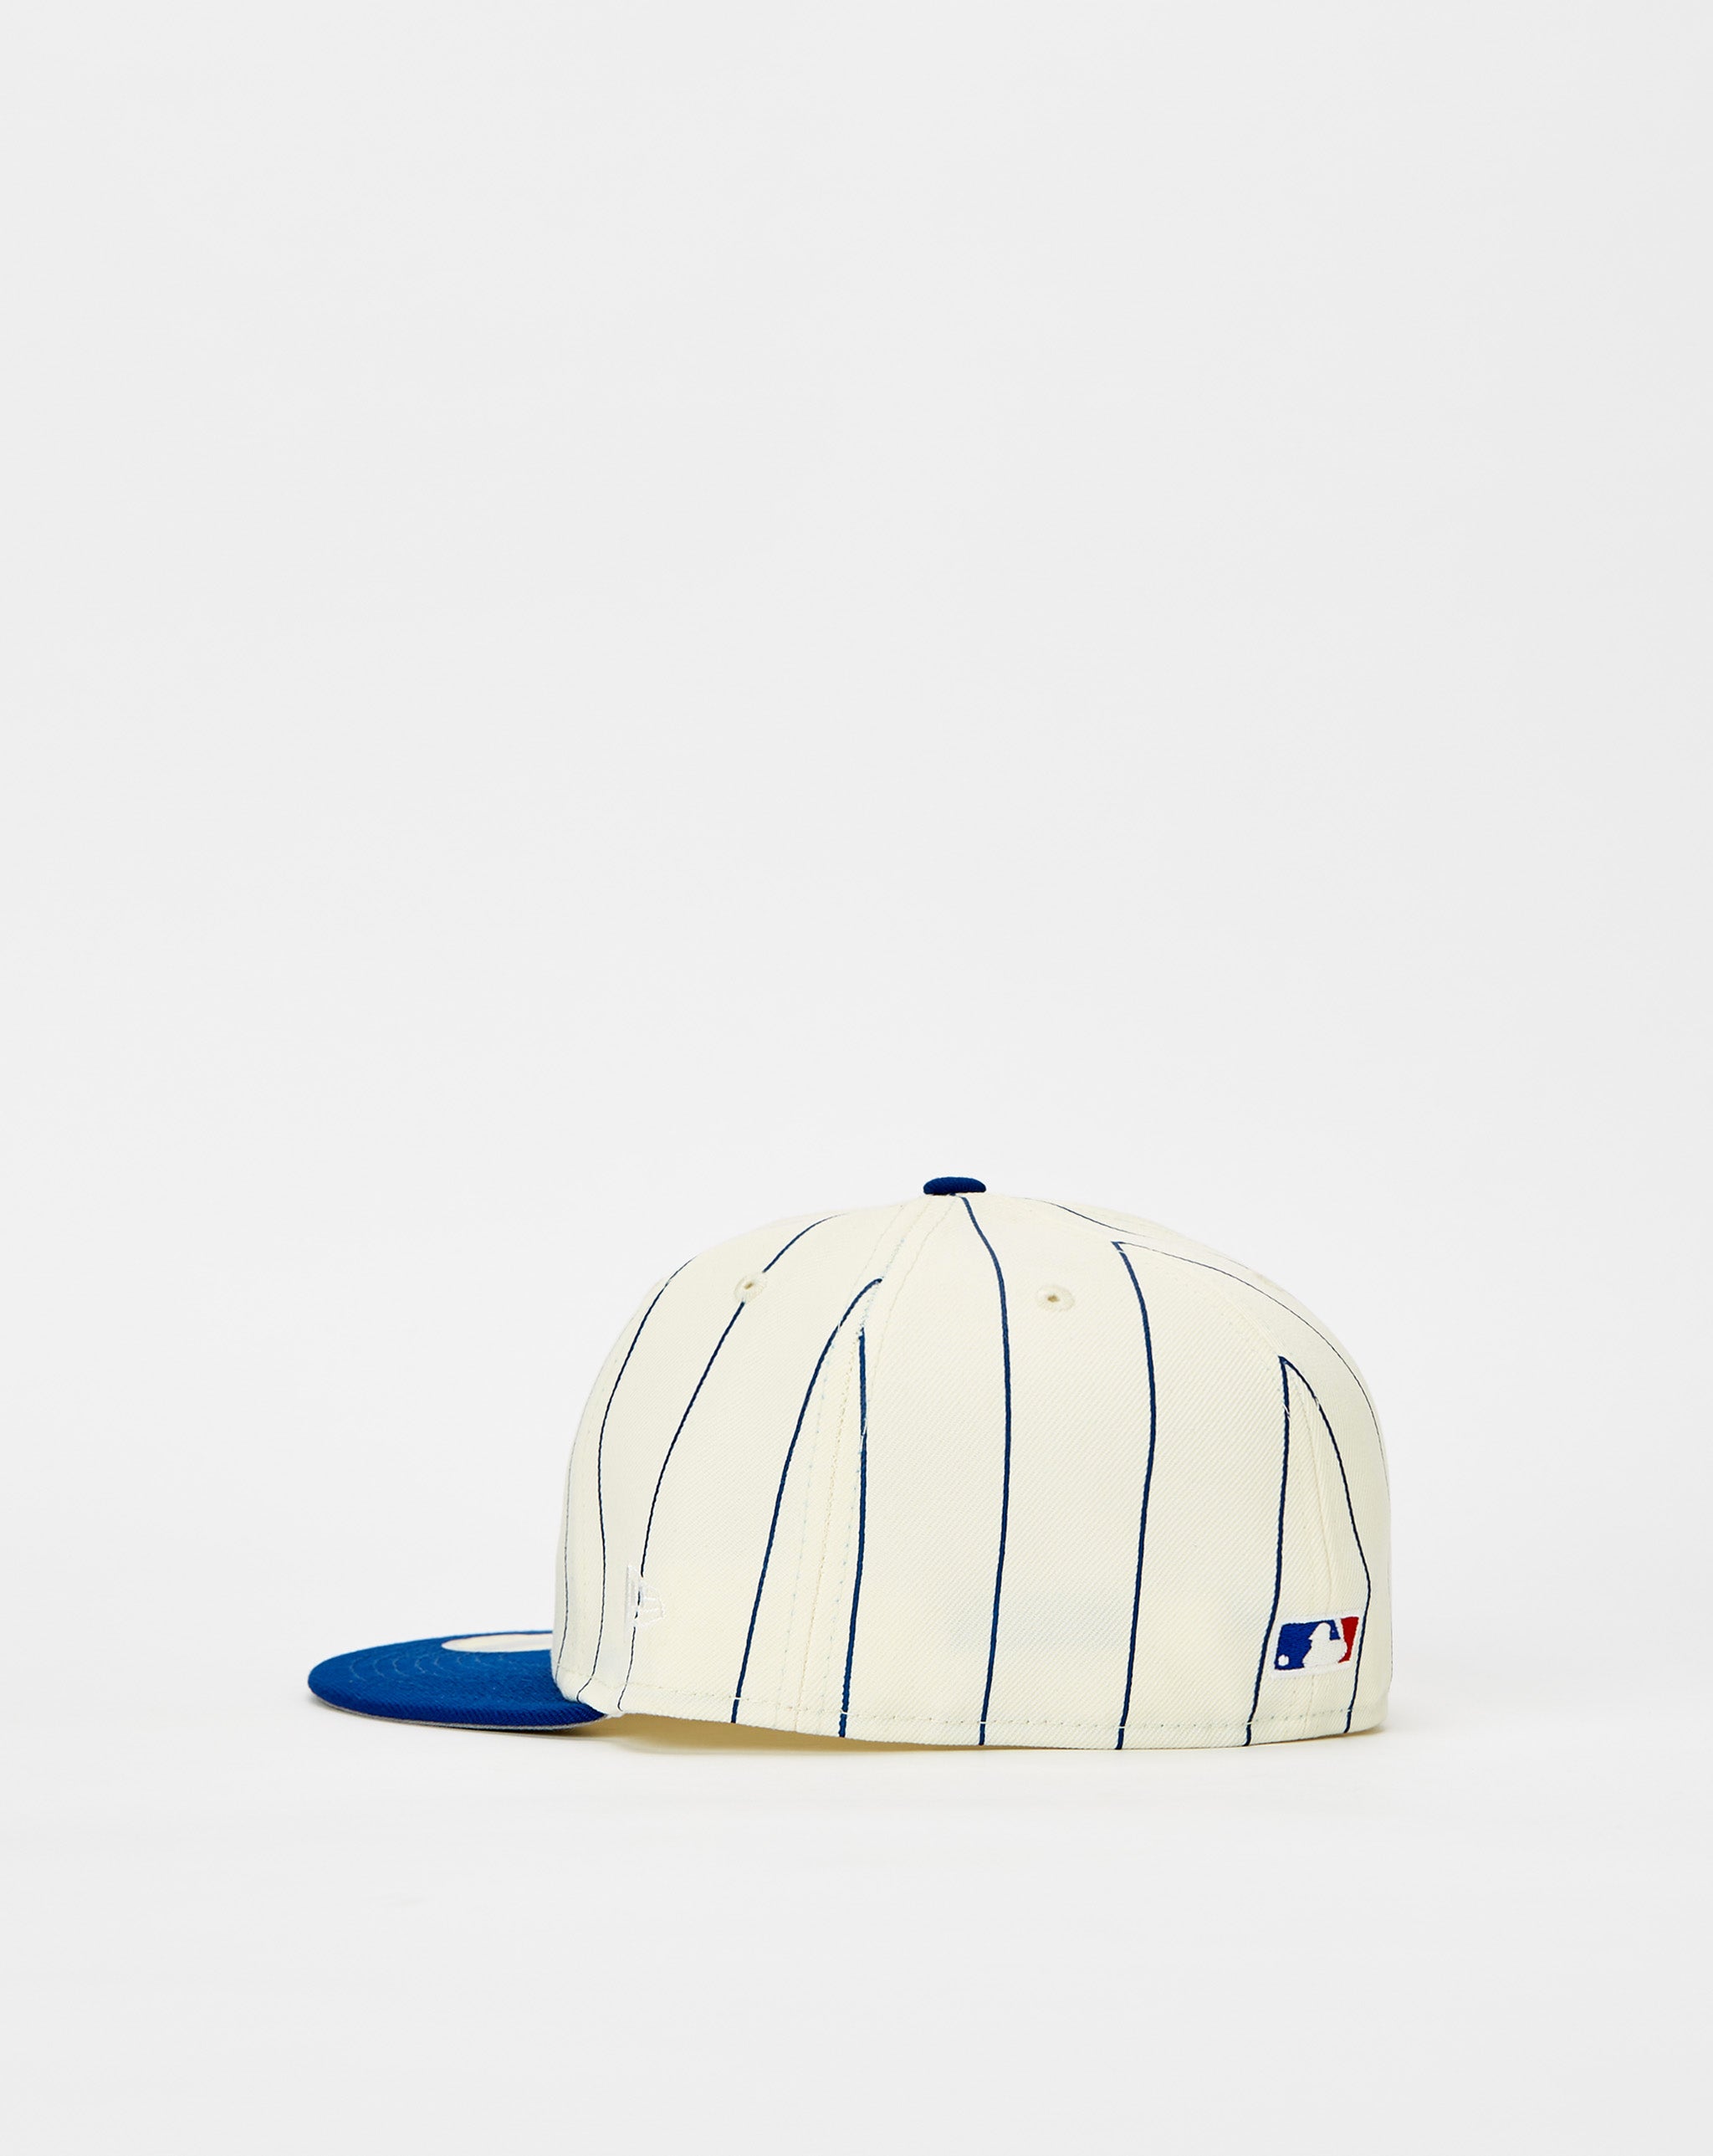 New Era Chicago Cubs ‘Retro City’ 59Fifty - Rule of Next Accessories